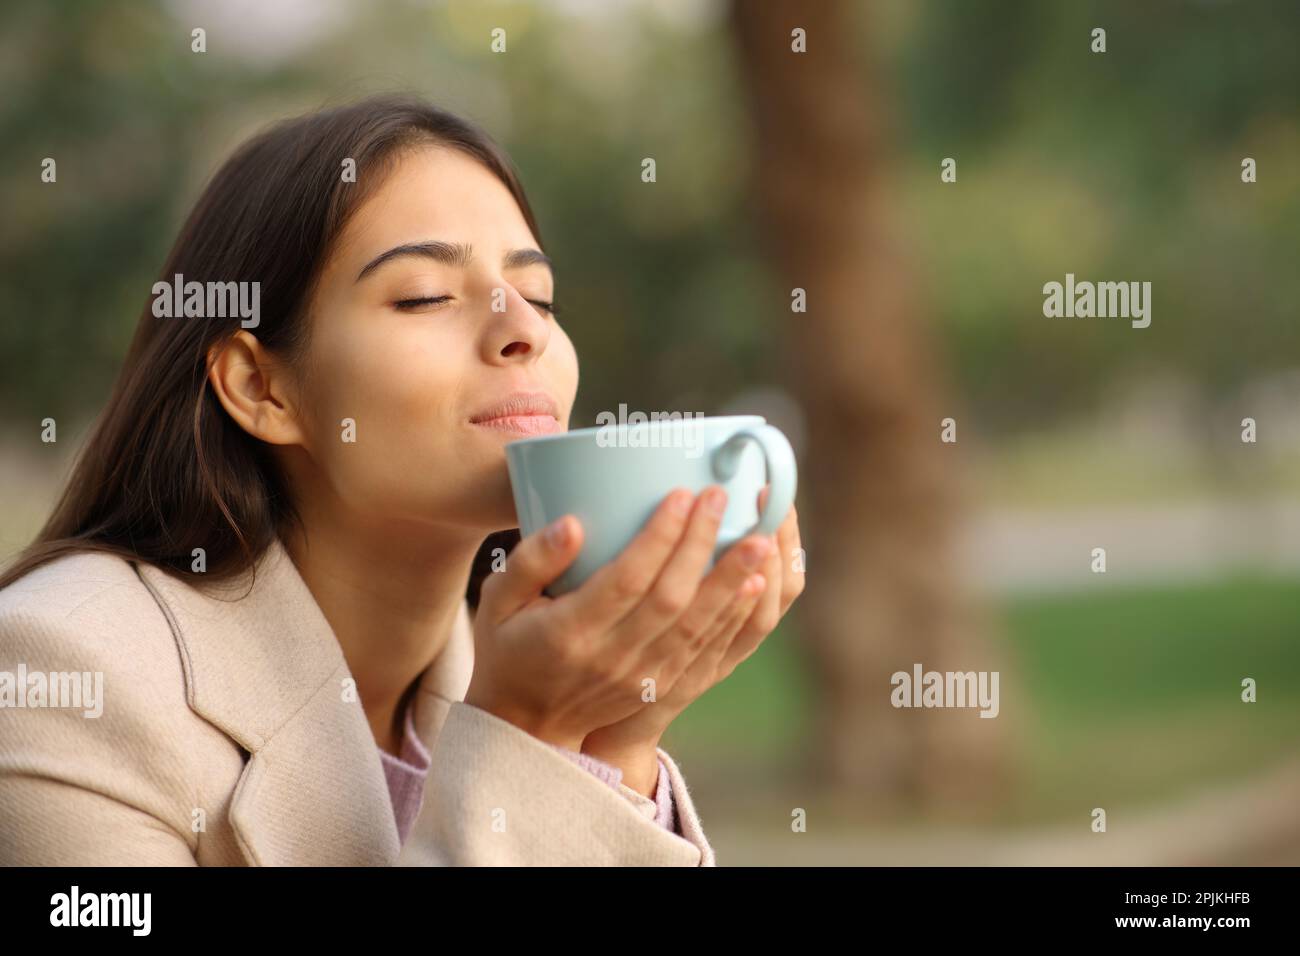 Woman in winter smelling coffee aroma sitting in a park Stock Photo